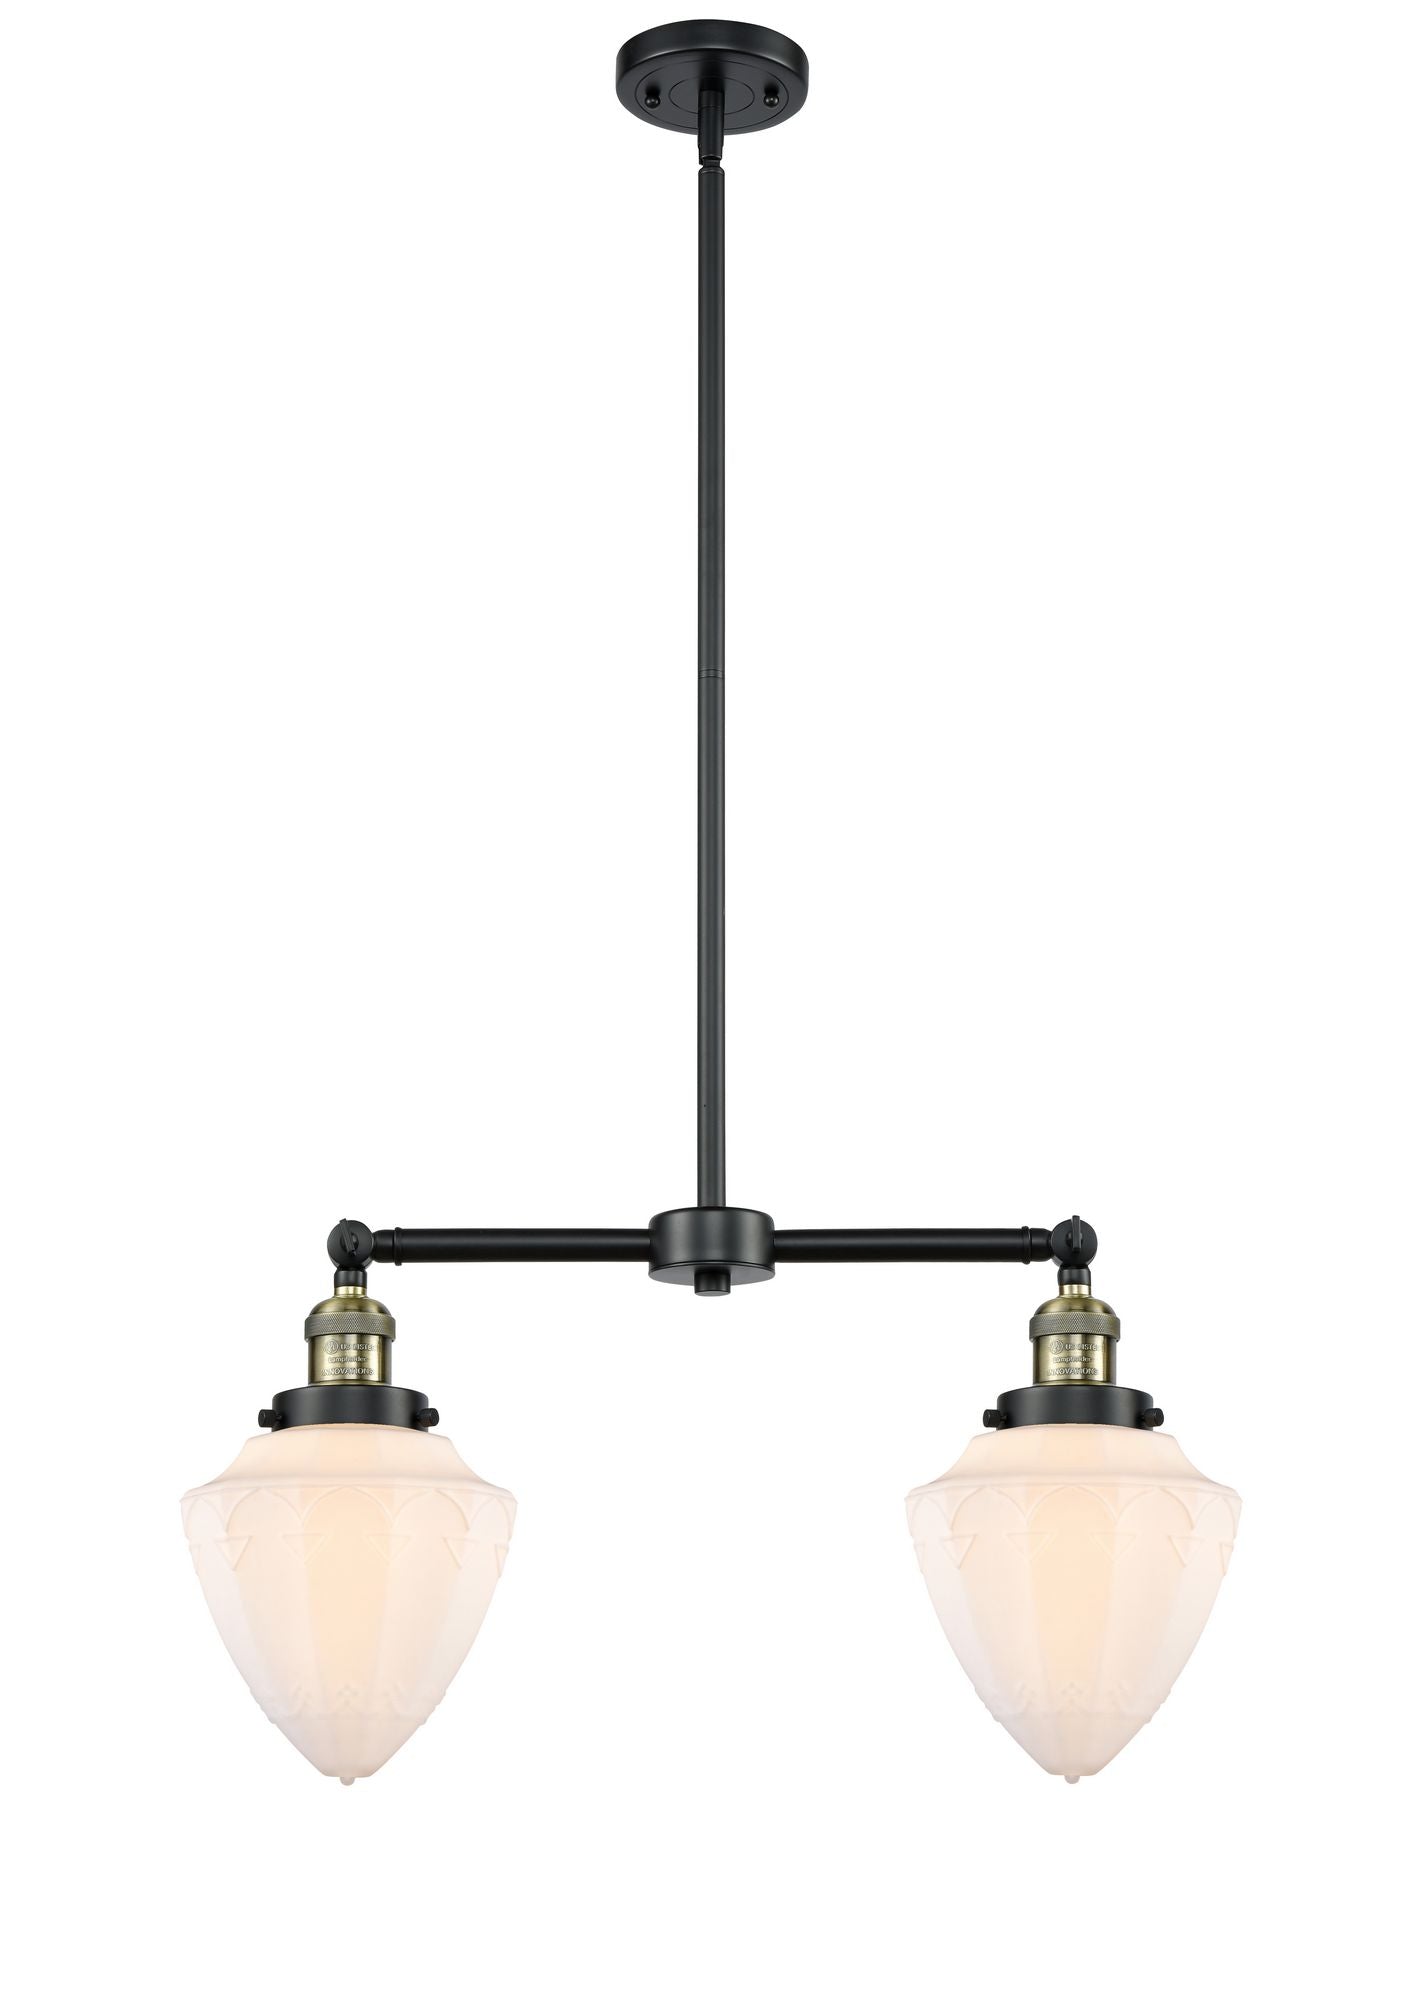 209-BAB-G661-7 2-Light 24" Black Antique Brass Island Light - Matte White Cased Small Bullet Glass - LED Bulb - Dimmensions: 24 x 7 x 15.25<br>Minimum Height : 24.25<br>Maximum Height : 48.25 - Sloped Ceiling Compatible: Yes